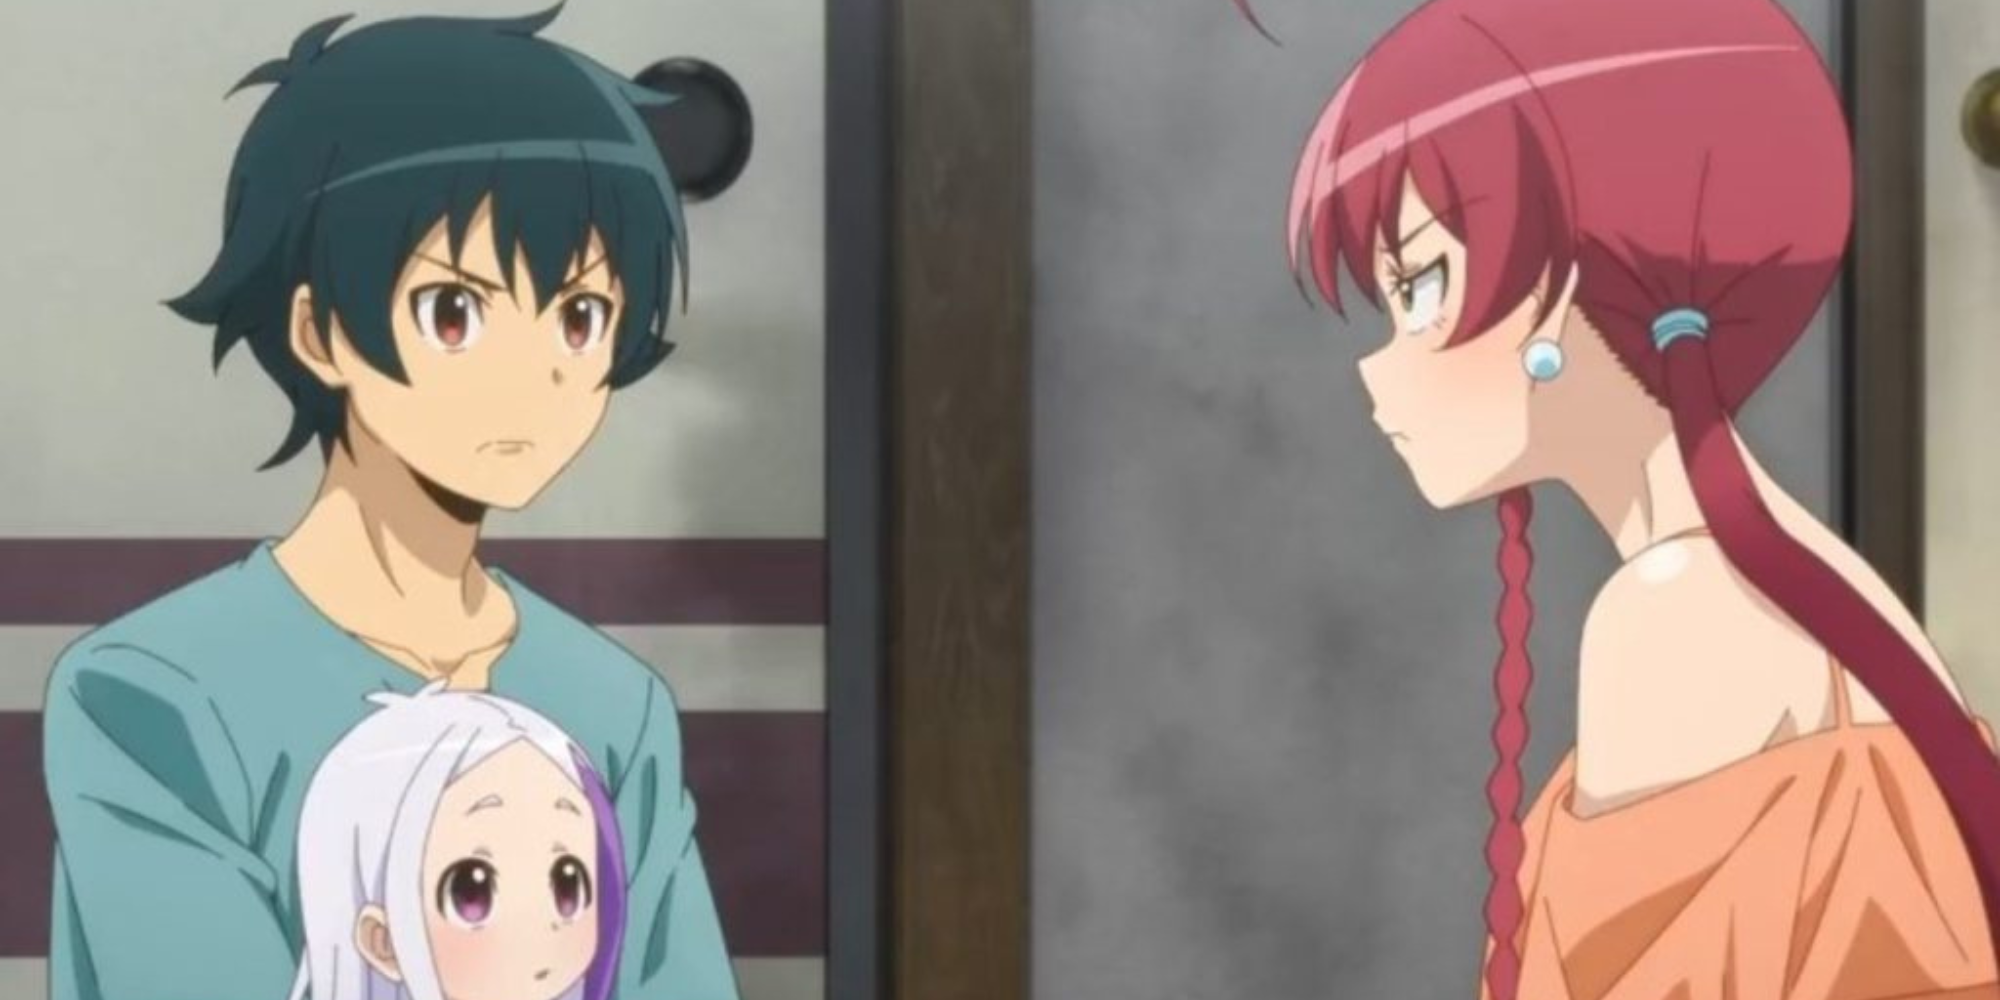 The Devil is a Part-Timer Season 2 Release Date 2022